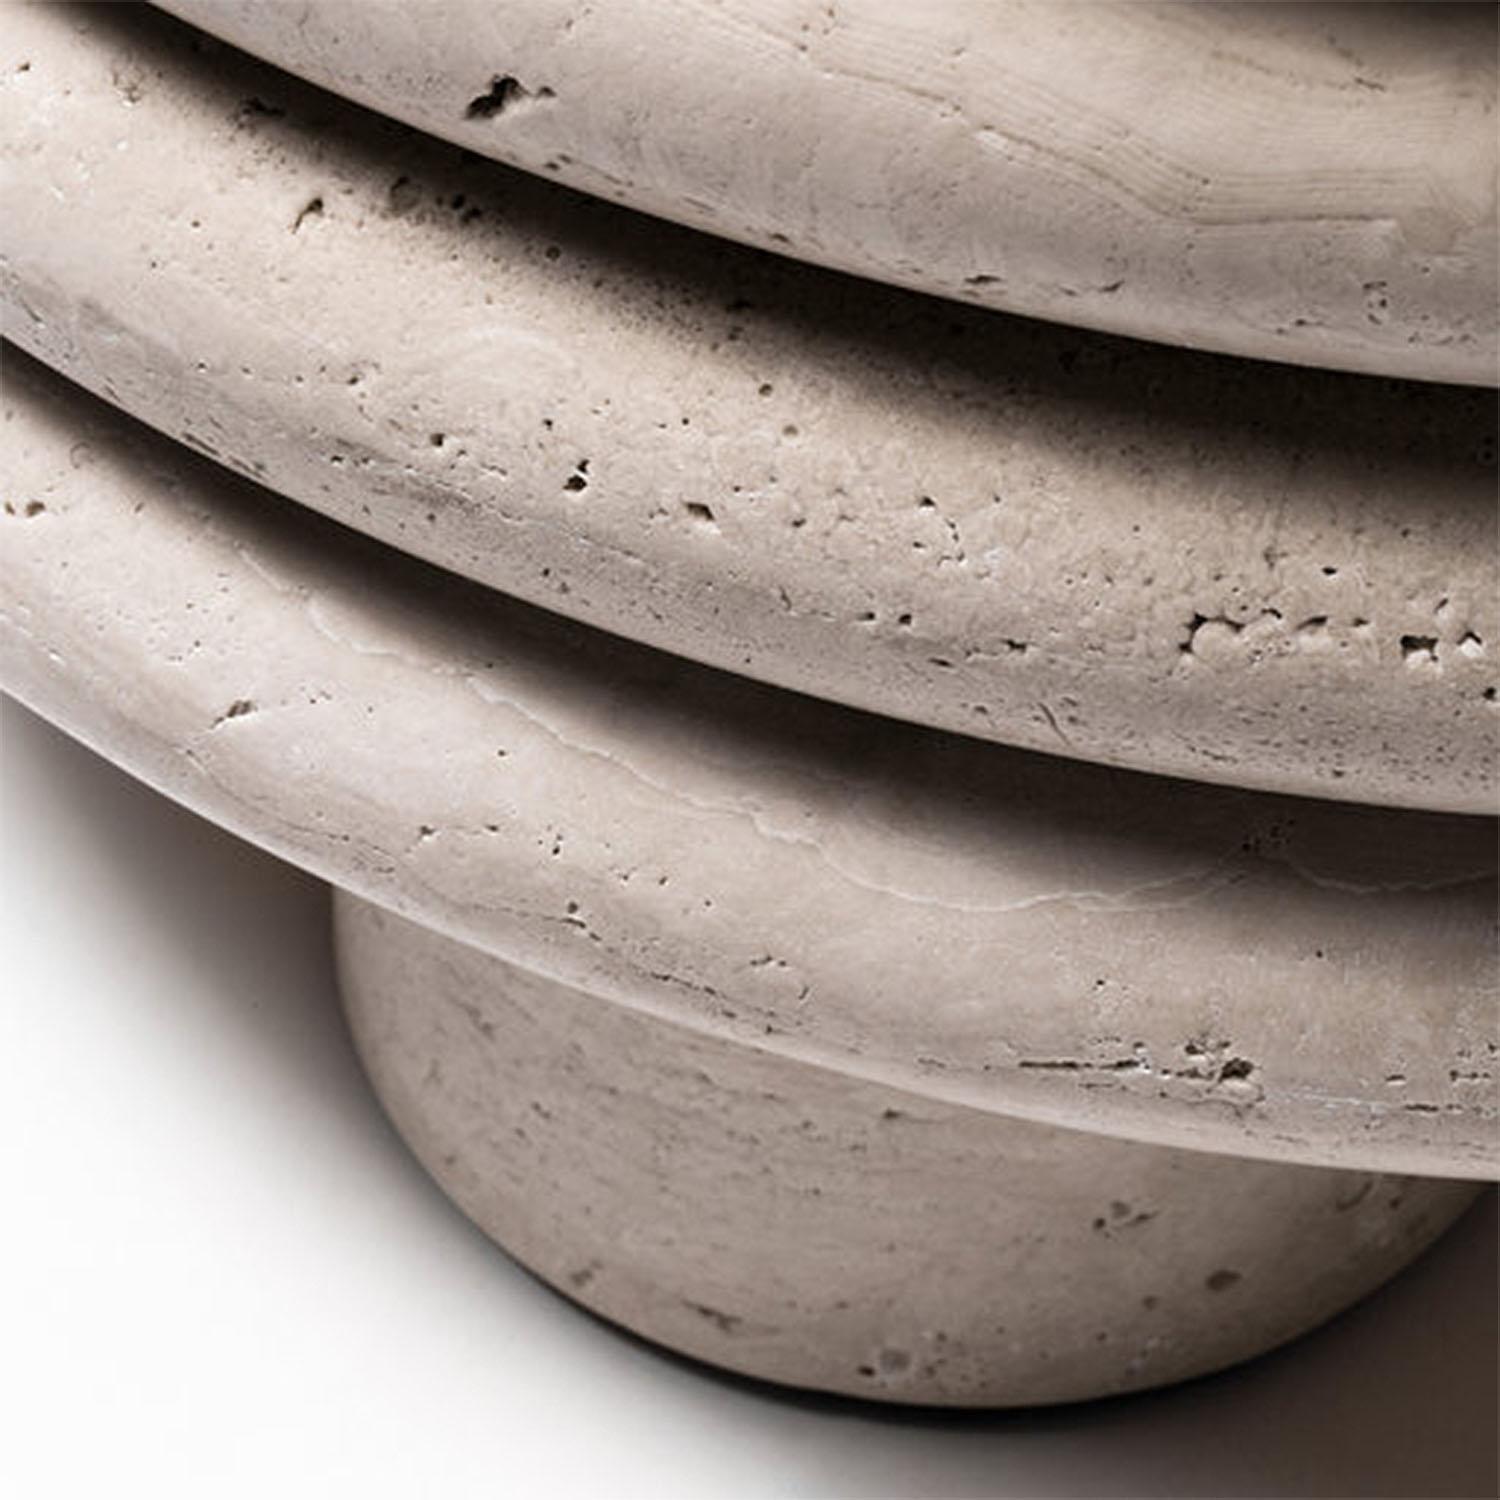 Contemporary round travertine stool - Scala by Stephane Parmentier for Giobagnara.

Organic shapes take center stage in the Scala Collections designed by Stephane Parmentier for Giobagnara. Featured in travertine, this stool boasts the recurring